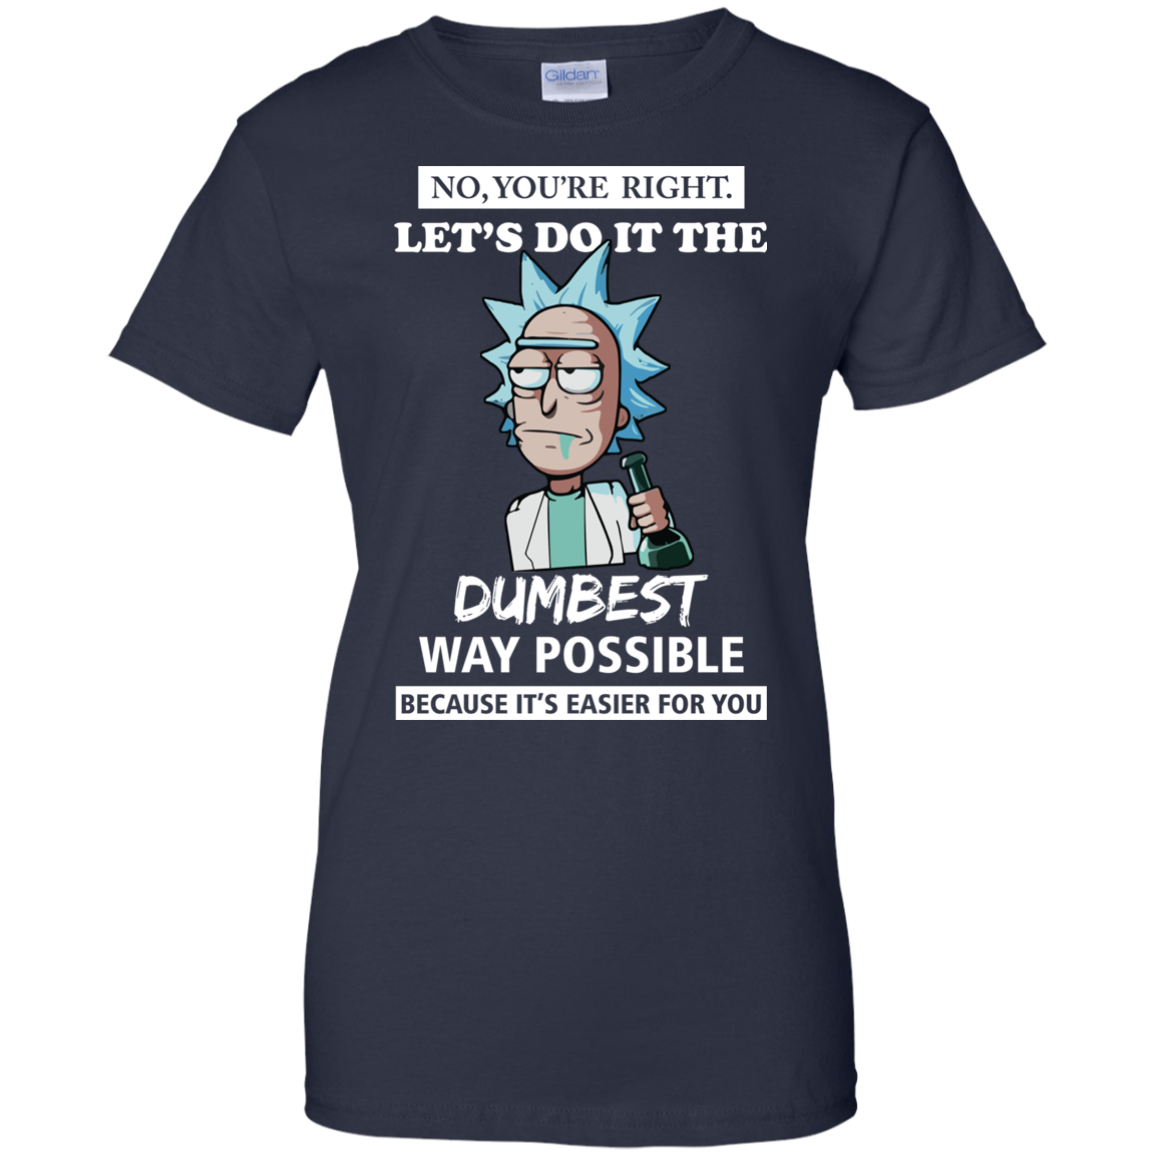 Rick and Morty - You're Right - Let's Do It The Dumbest Way Possible t ...